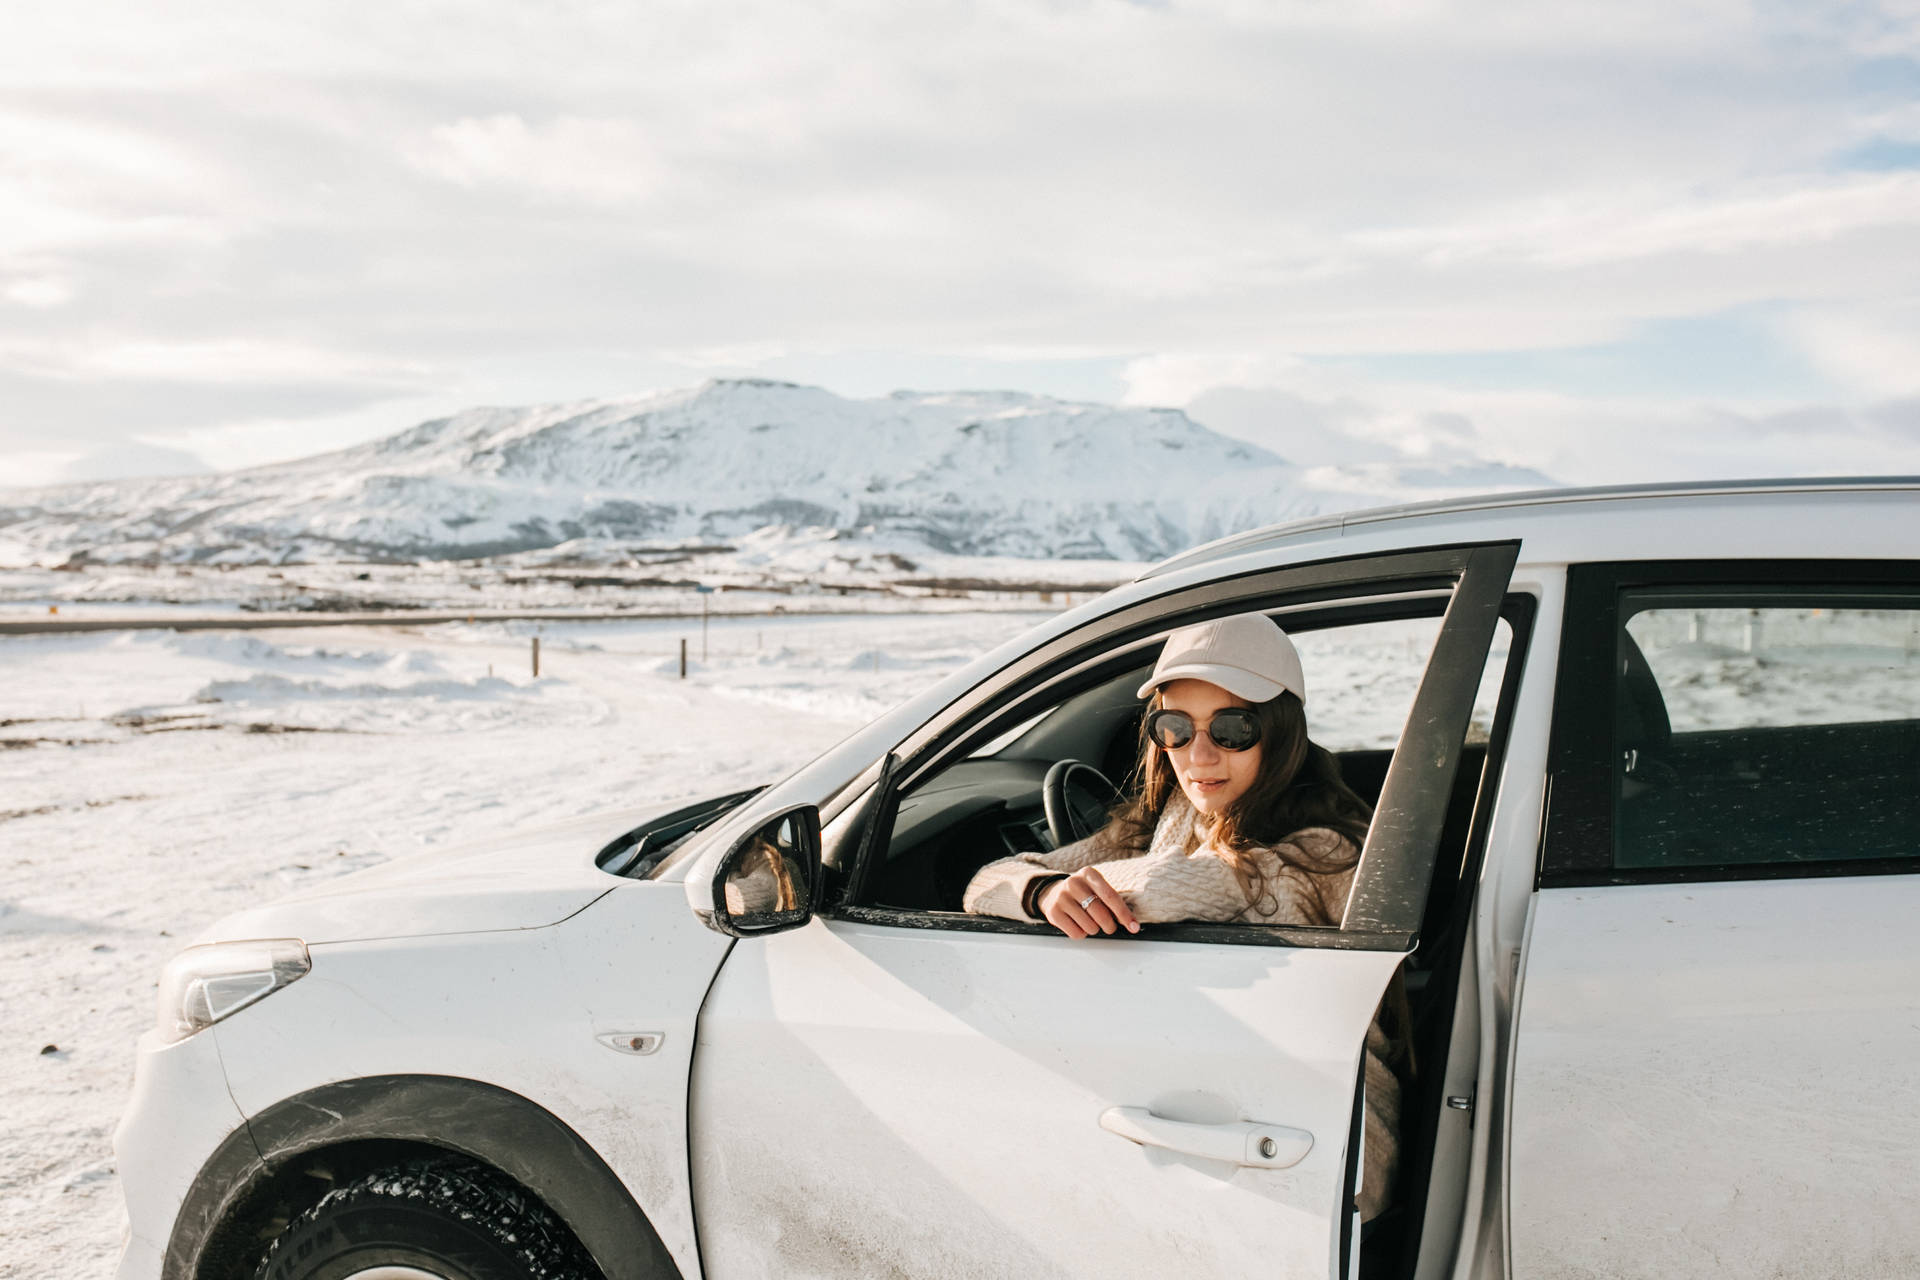 Woman In Car During Cool Winter Background